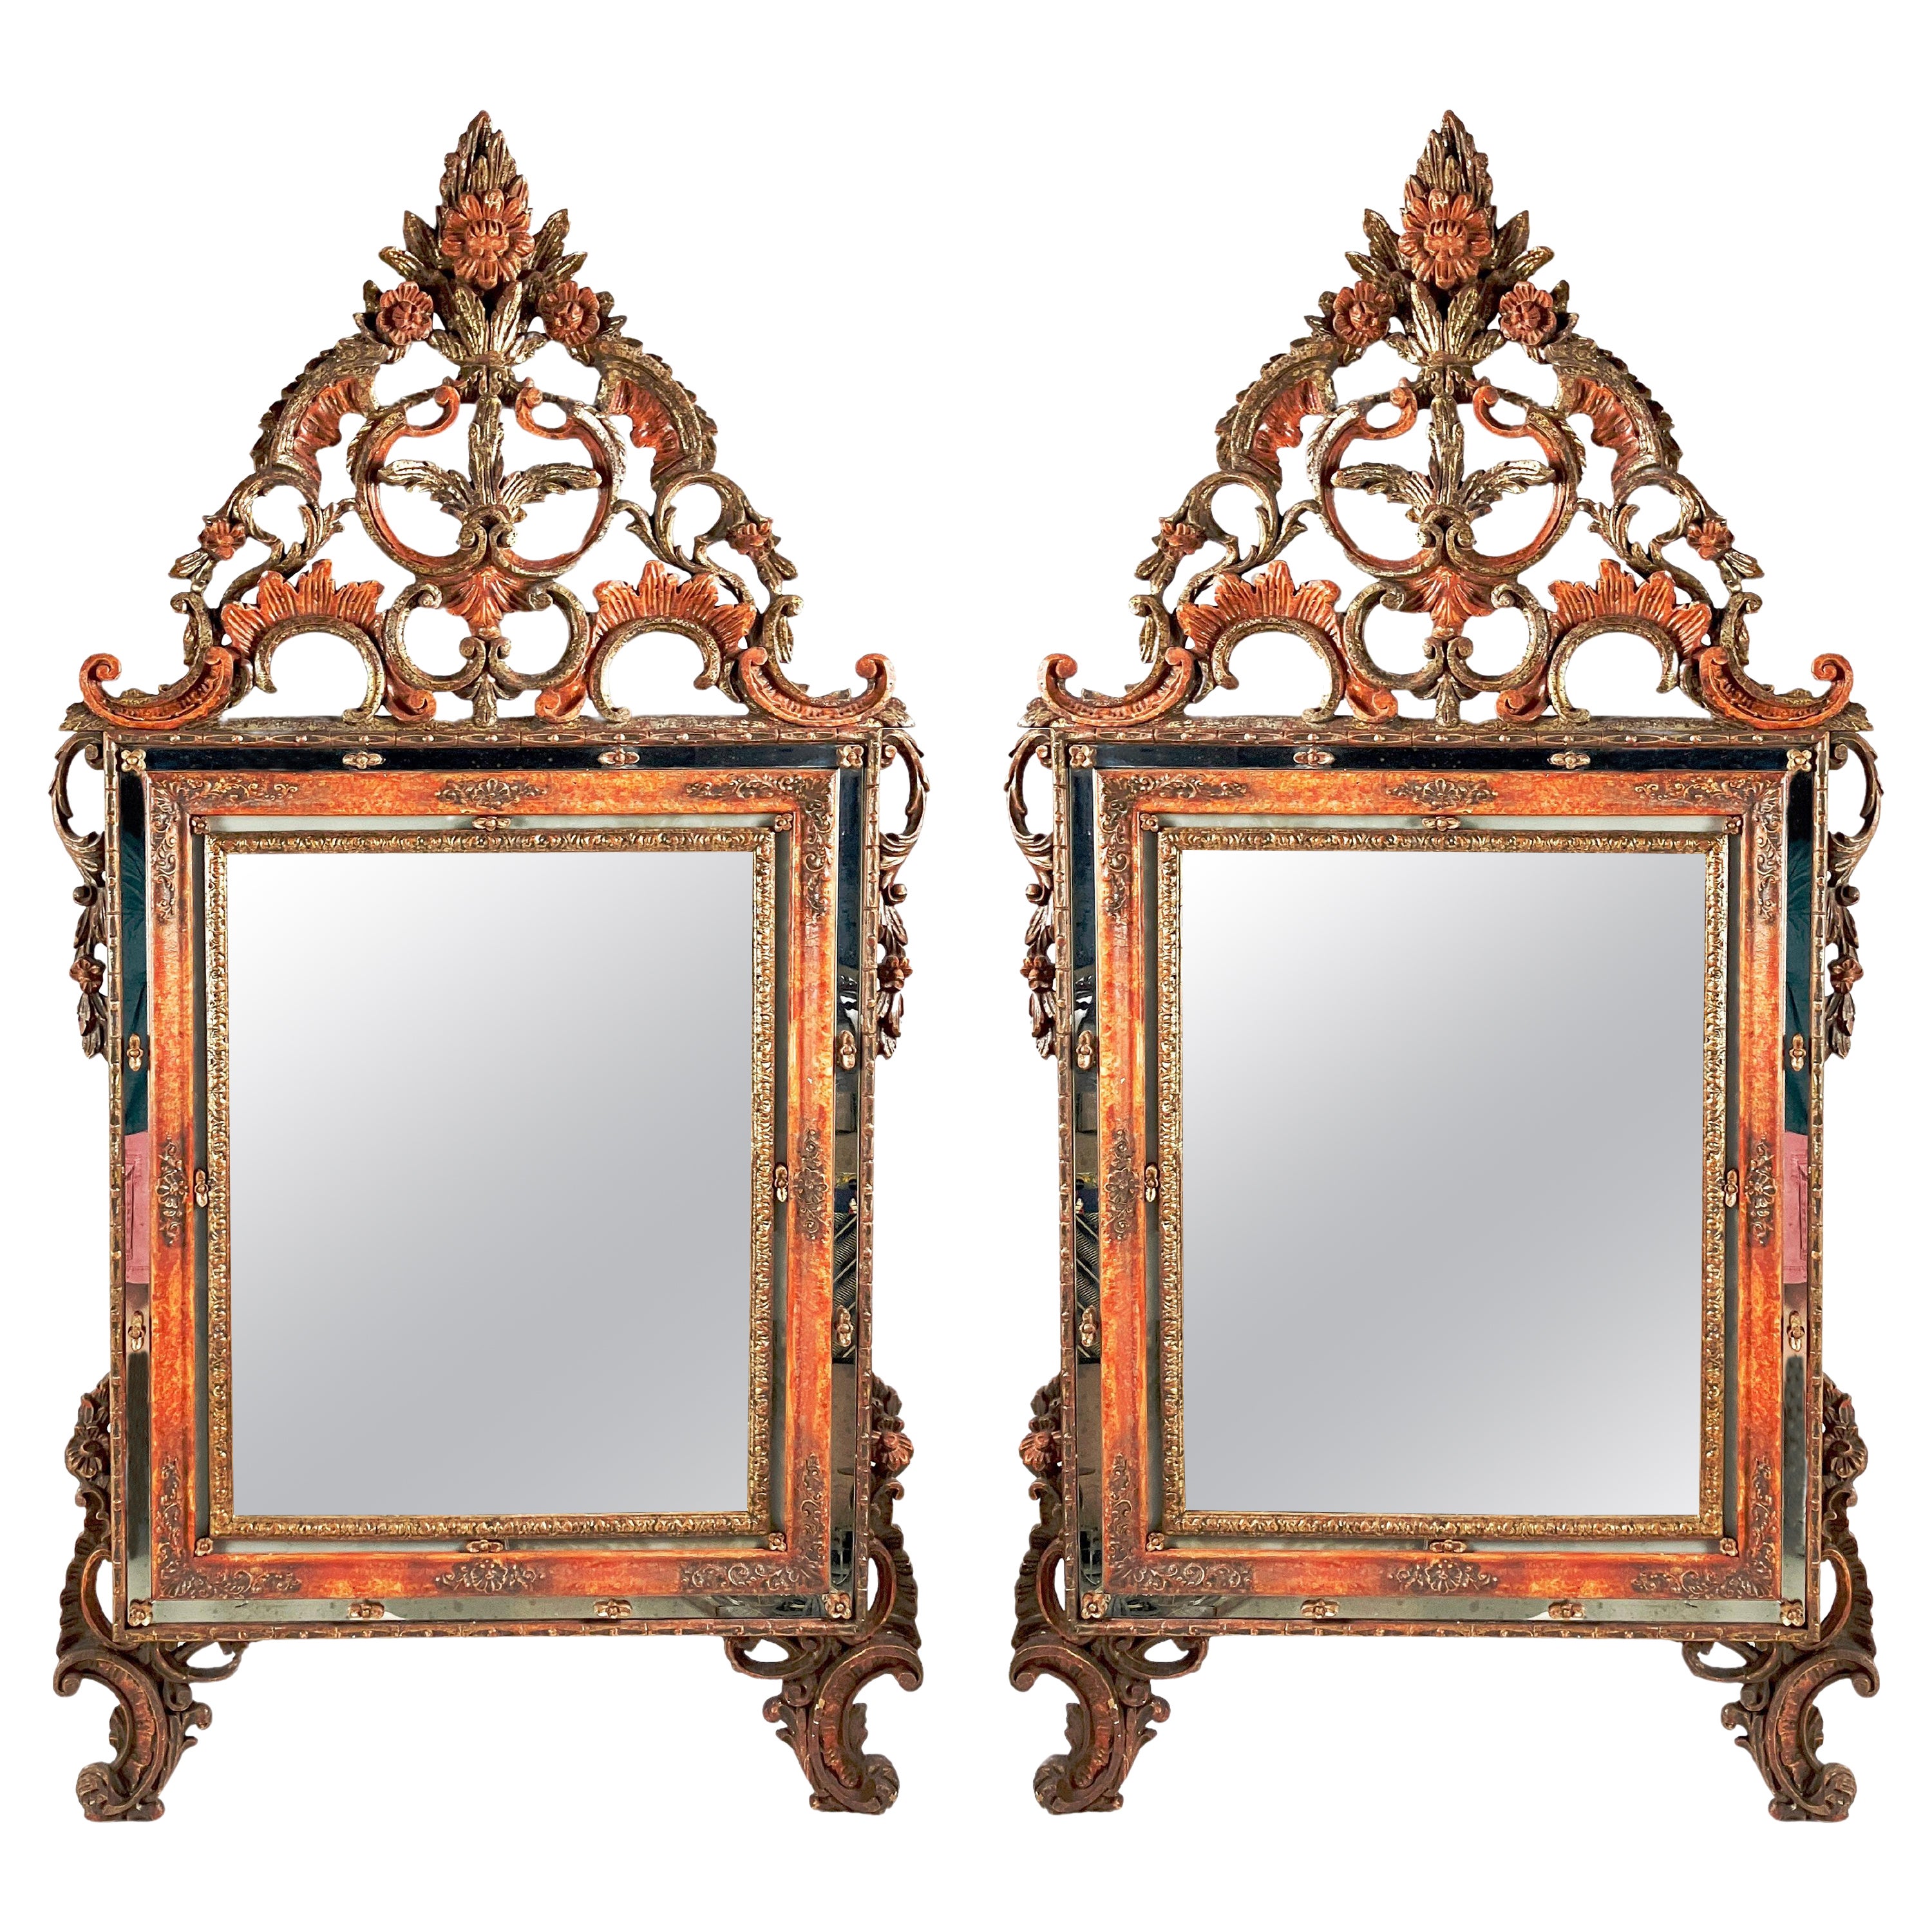 Pair of Antique Venetian Fancy Paint-Decorated Mirrors in Peach and Gold 